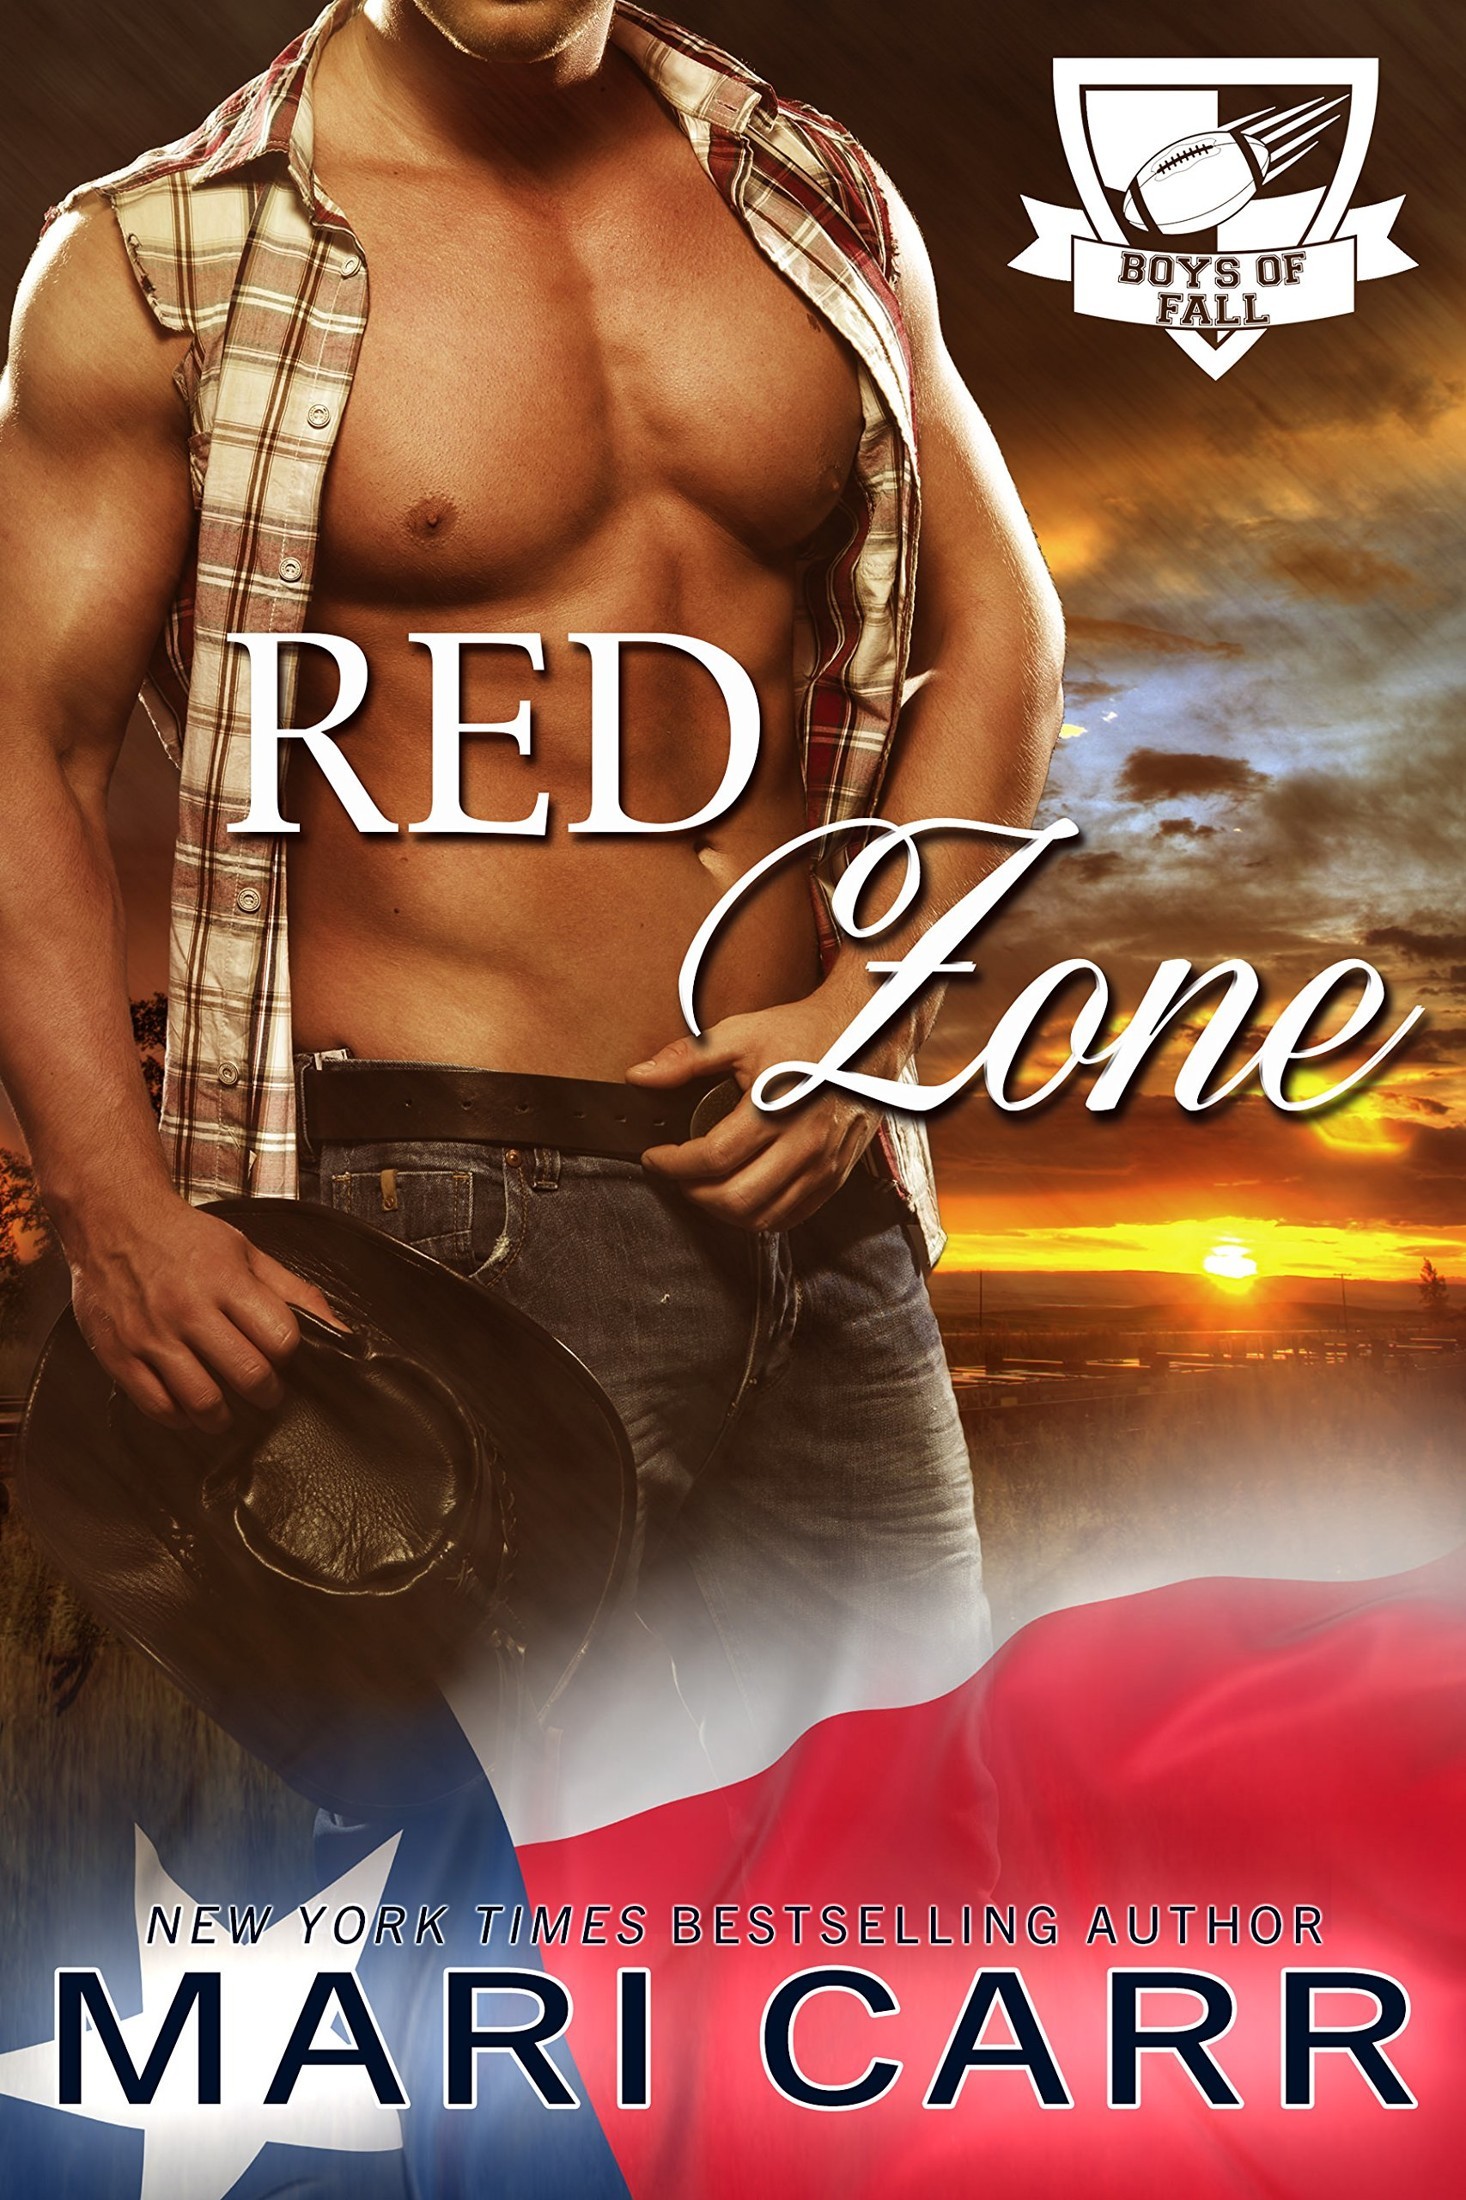 Red Zone: Boys of Fall by Mari Carr